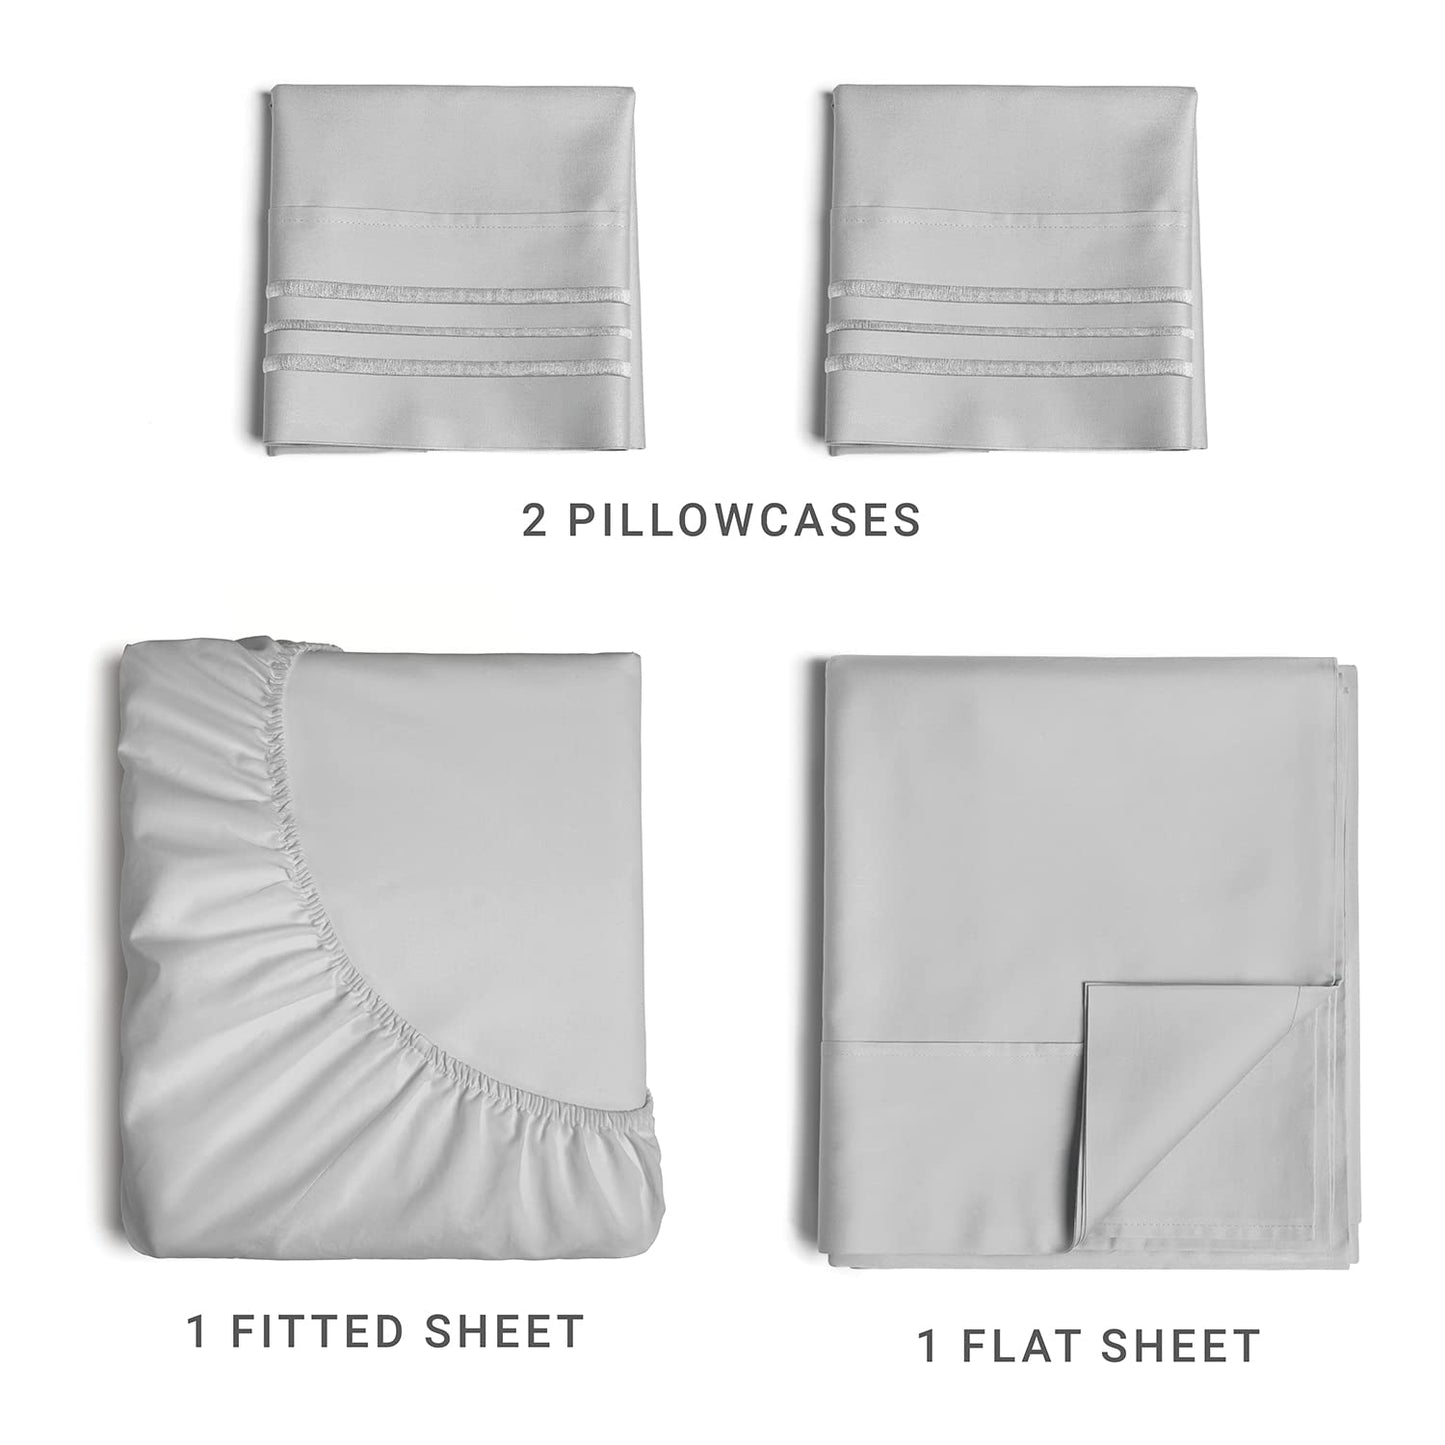 King Size 4 Piece Sheet Set - Comfy Breathable & Cooling Sheets - Hotel Luxury Bed Sheets for Women & Men - Deep Pockets, Easy-Fit, Soft & Wrinkle Free Sheets - French Grey Oeko-Tex Bed Sheet Set